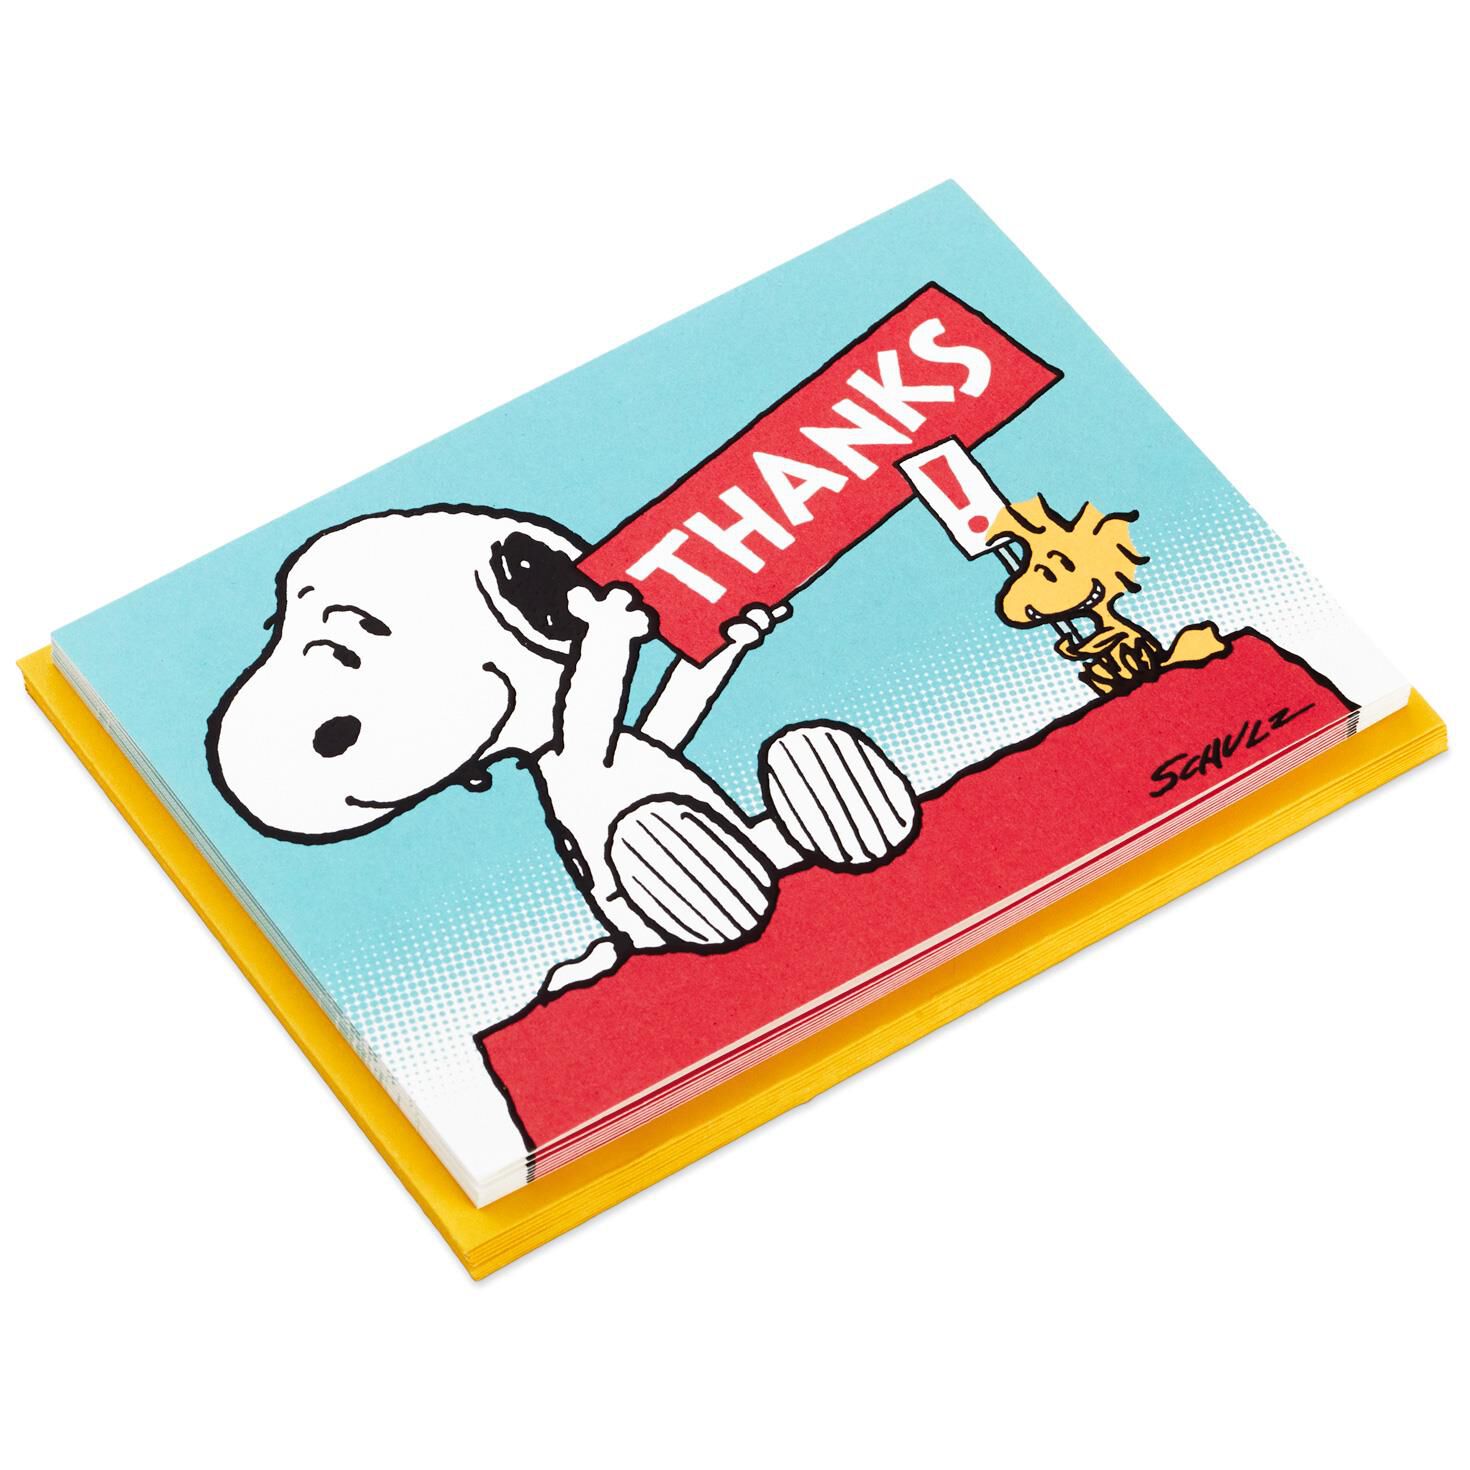 Ravisah In Collectables Peanuts Snoopy Collectables Hallmark Snoopy Peanuts Blank Thank You Card W Envelope